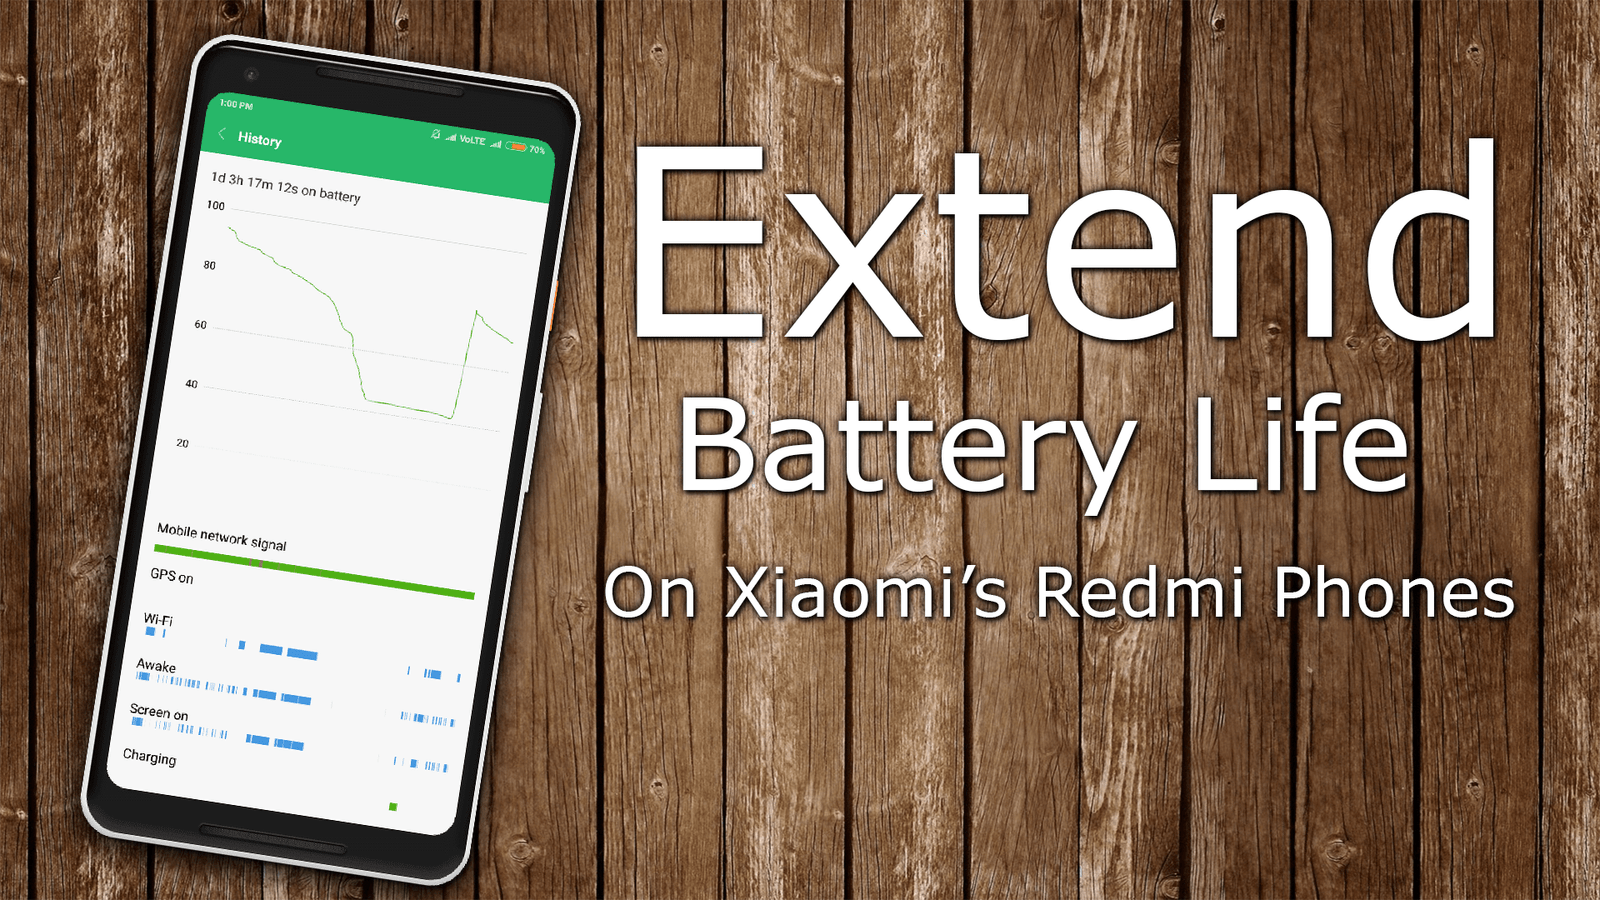 Want to Extend Battery Life on Xiaomi Redmi Phones